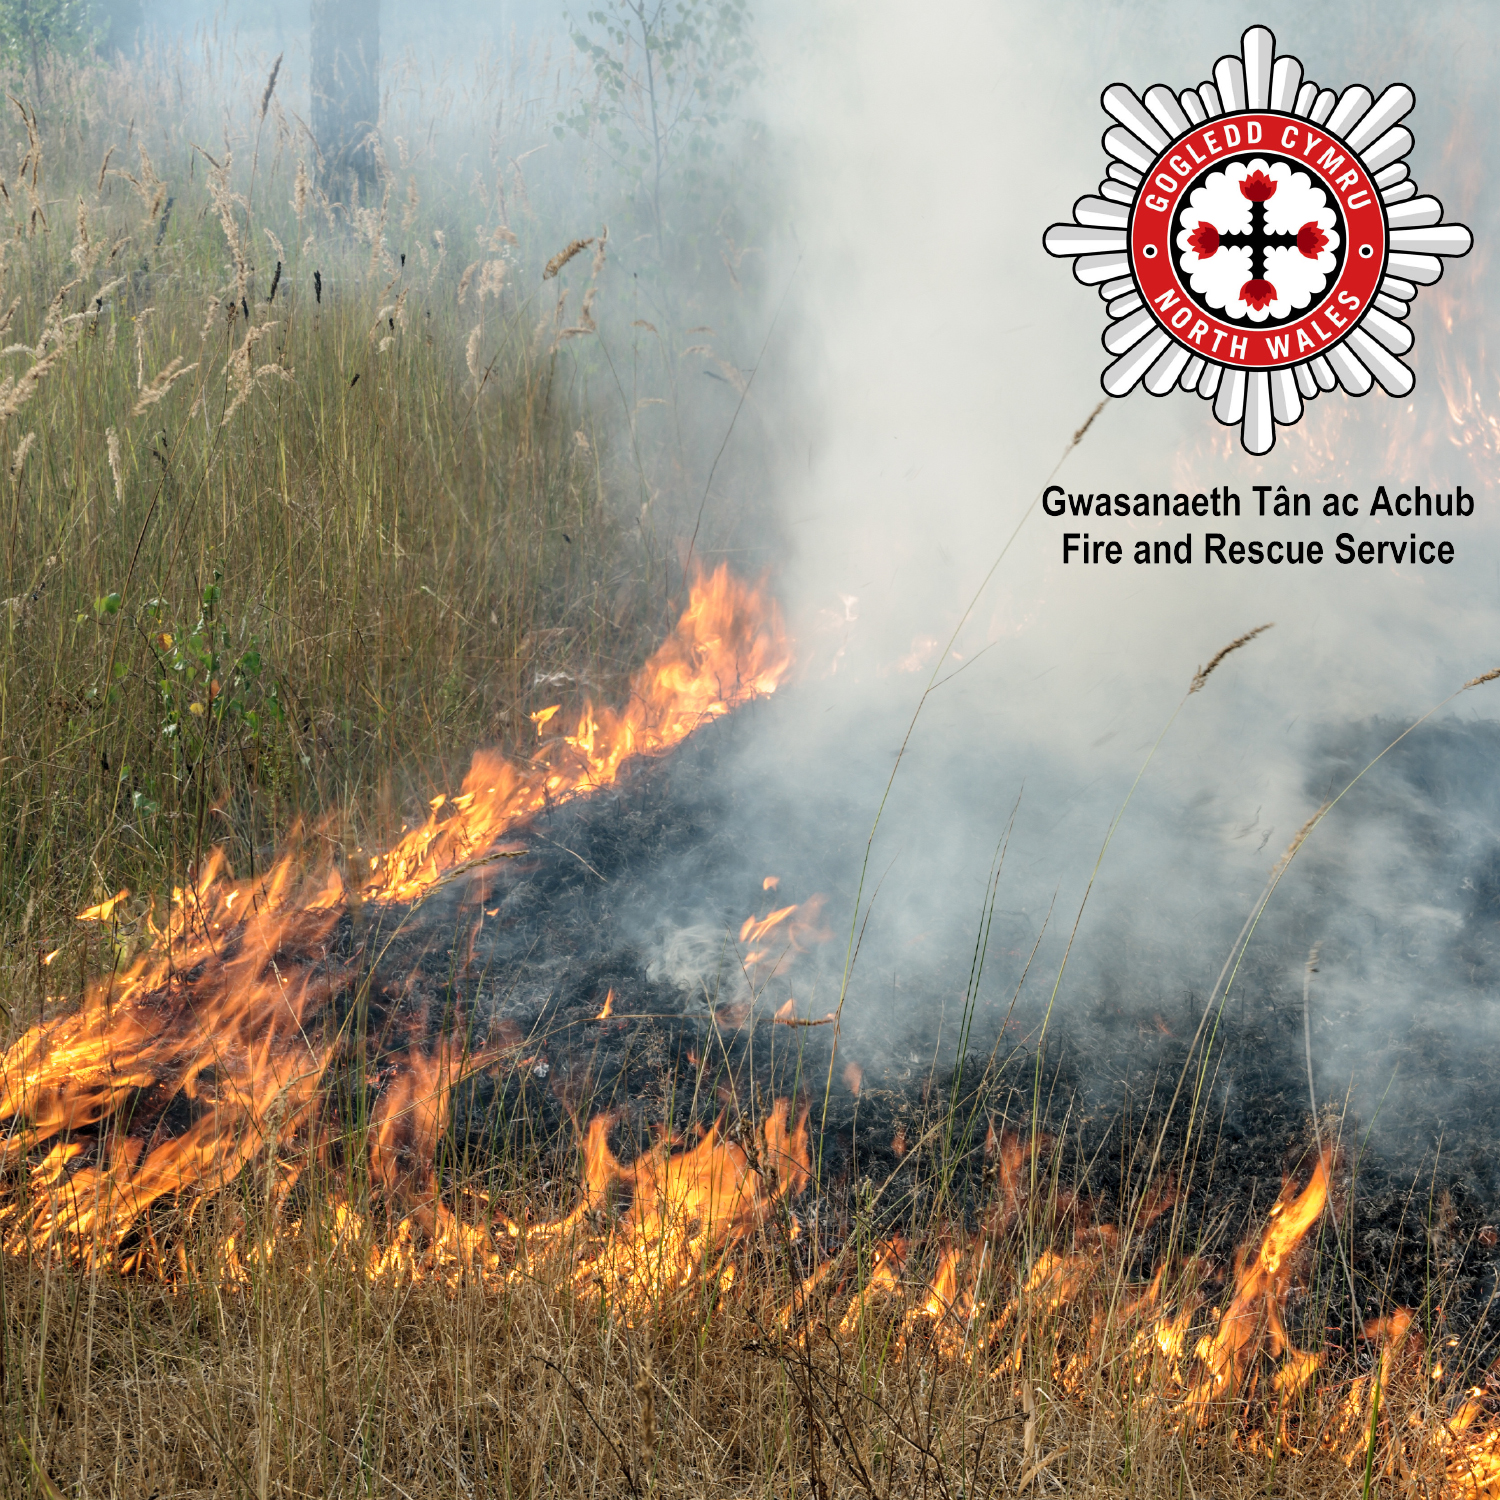 Appeal for care as controlled burning season starts